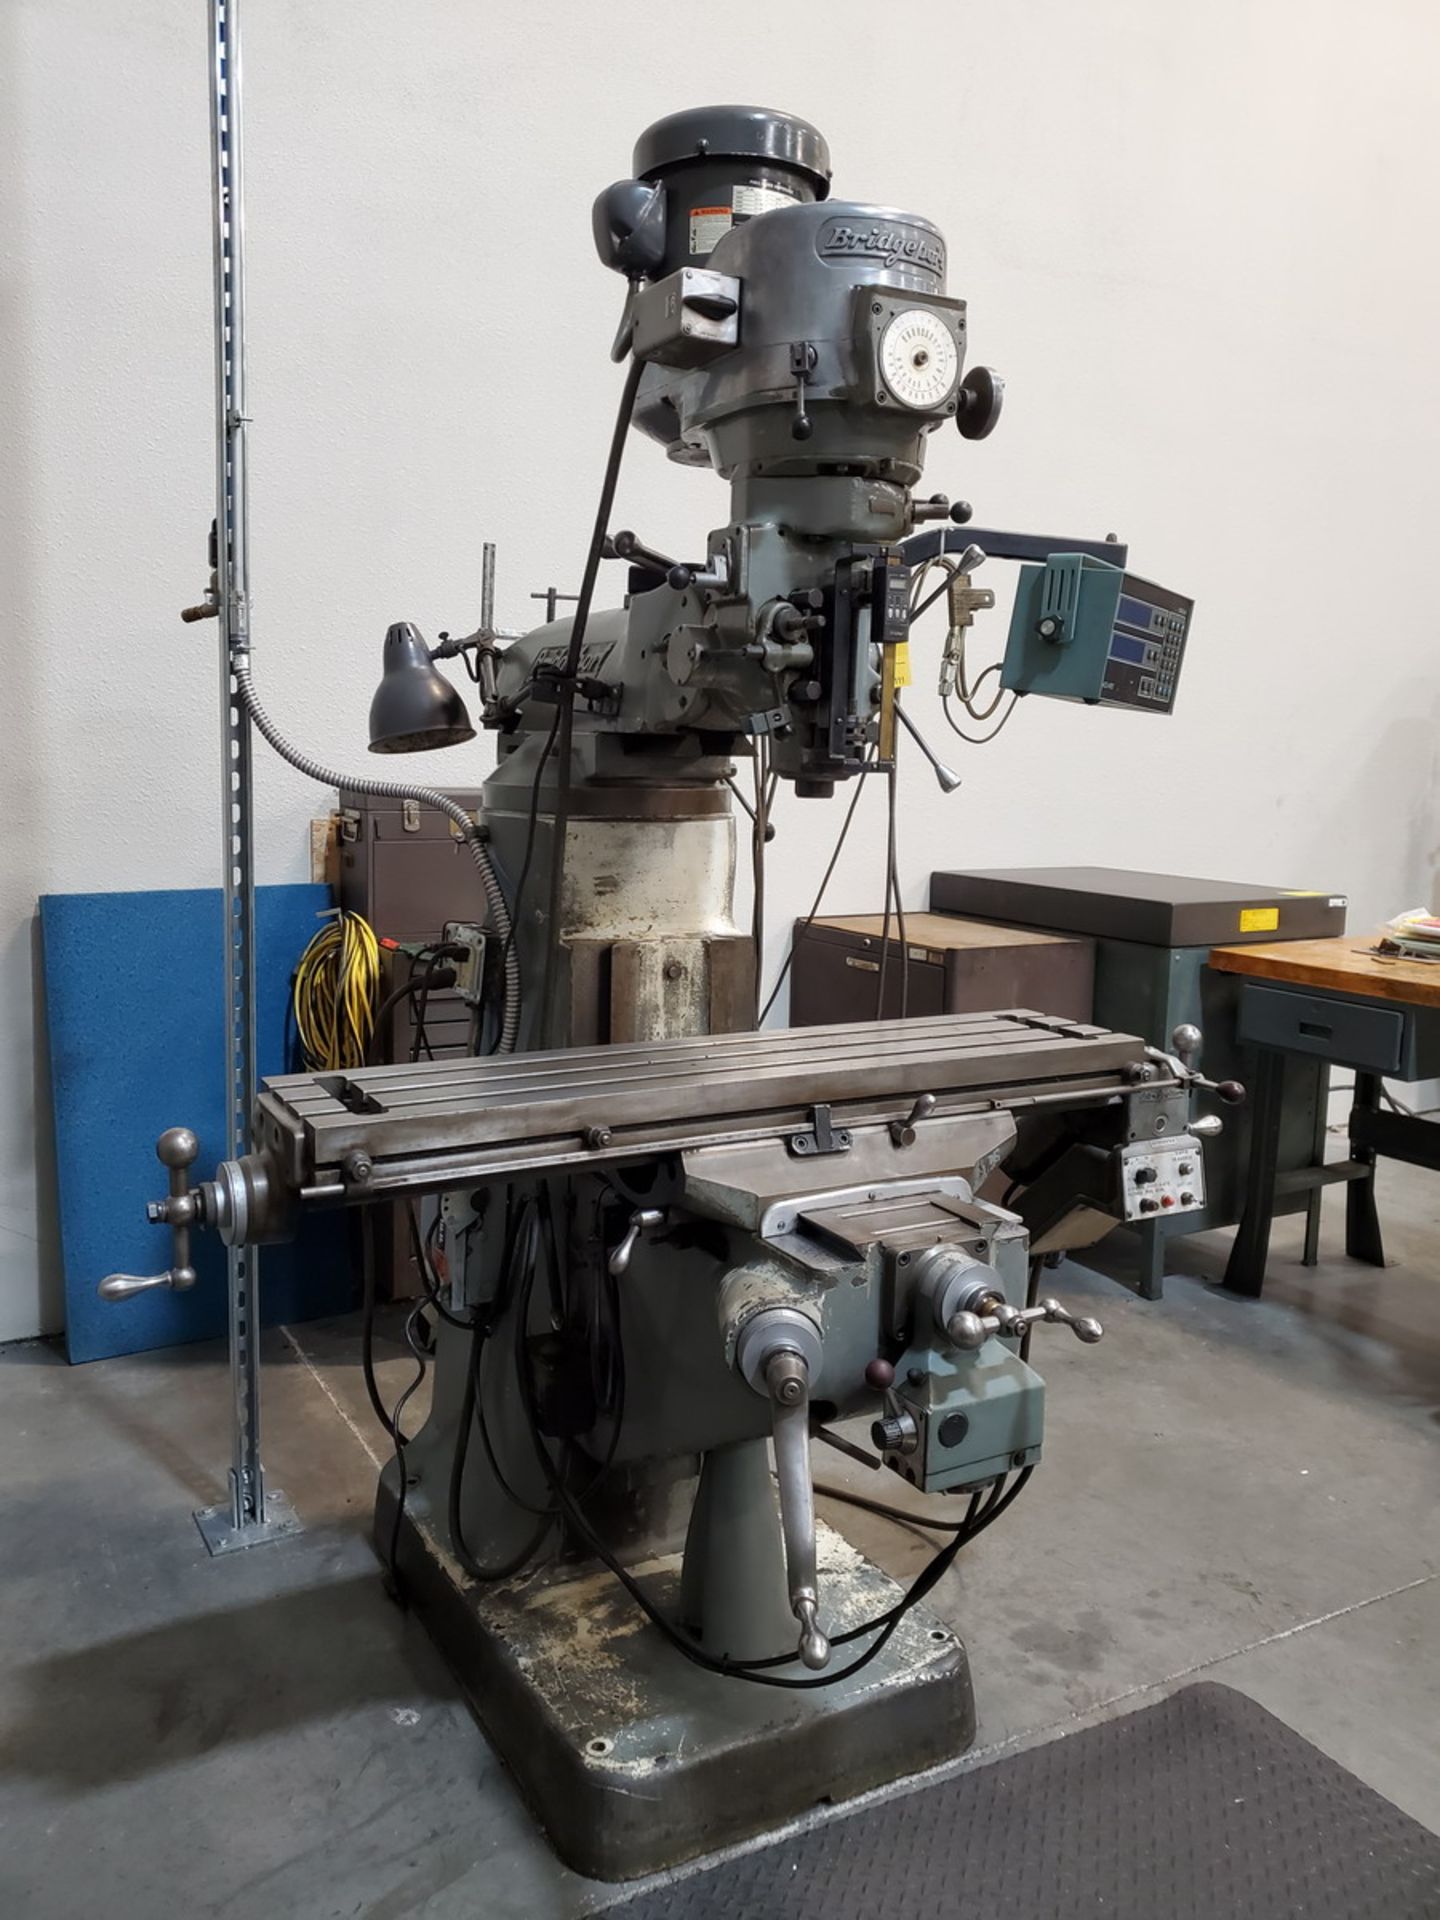 Bridgeport Vertical Milling Machine W/ Acu-Rite Controller, 220V, 3PH, 2HP, X/Y/Z Axis; T-Slot - Image 3 of 18